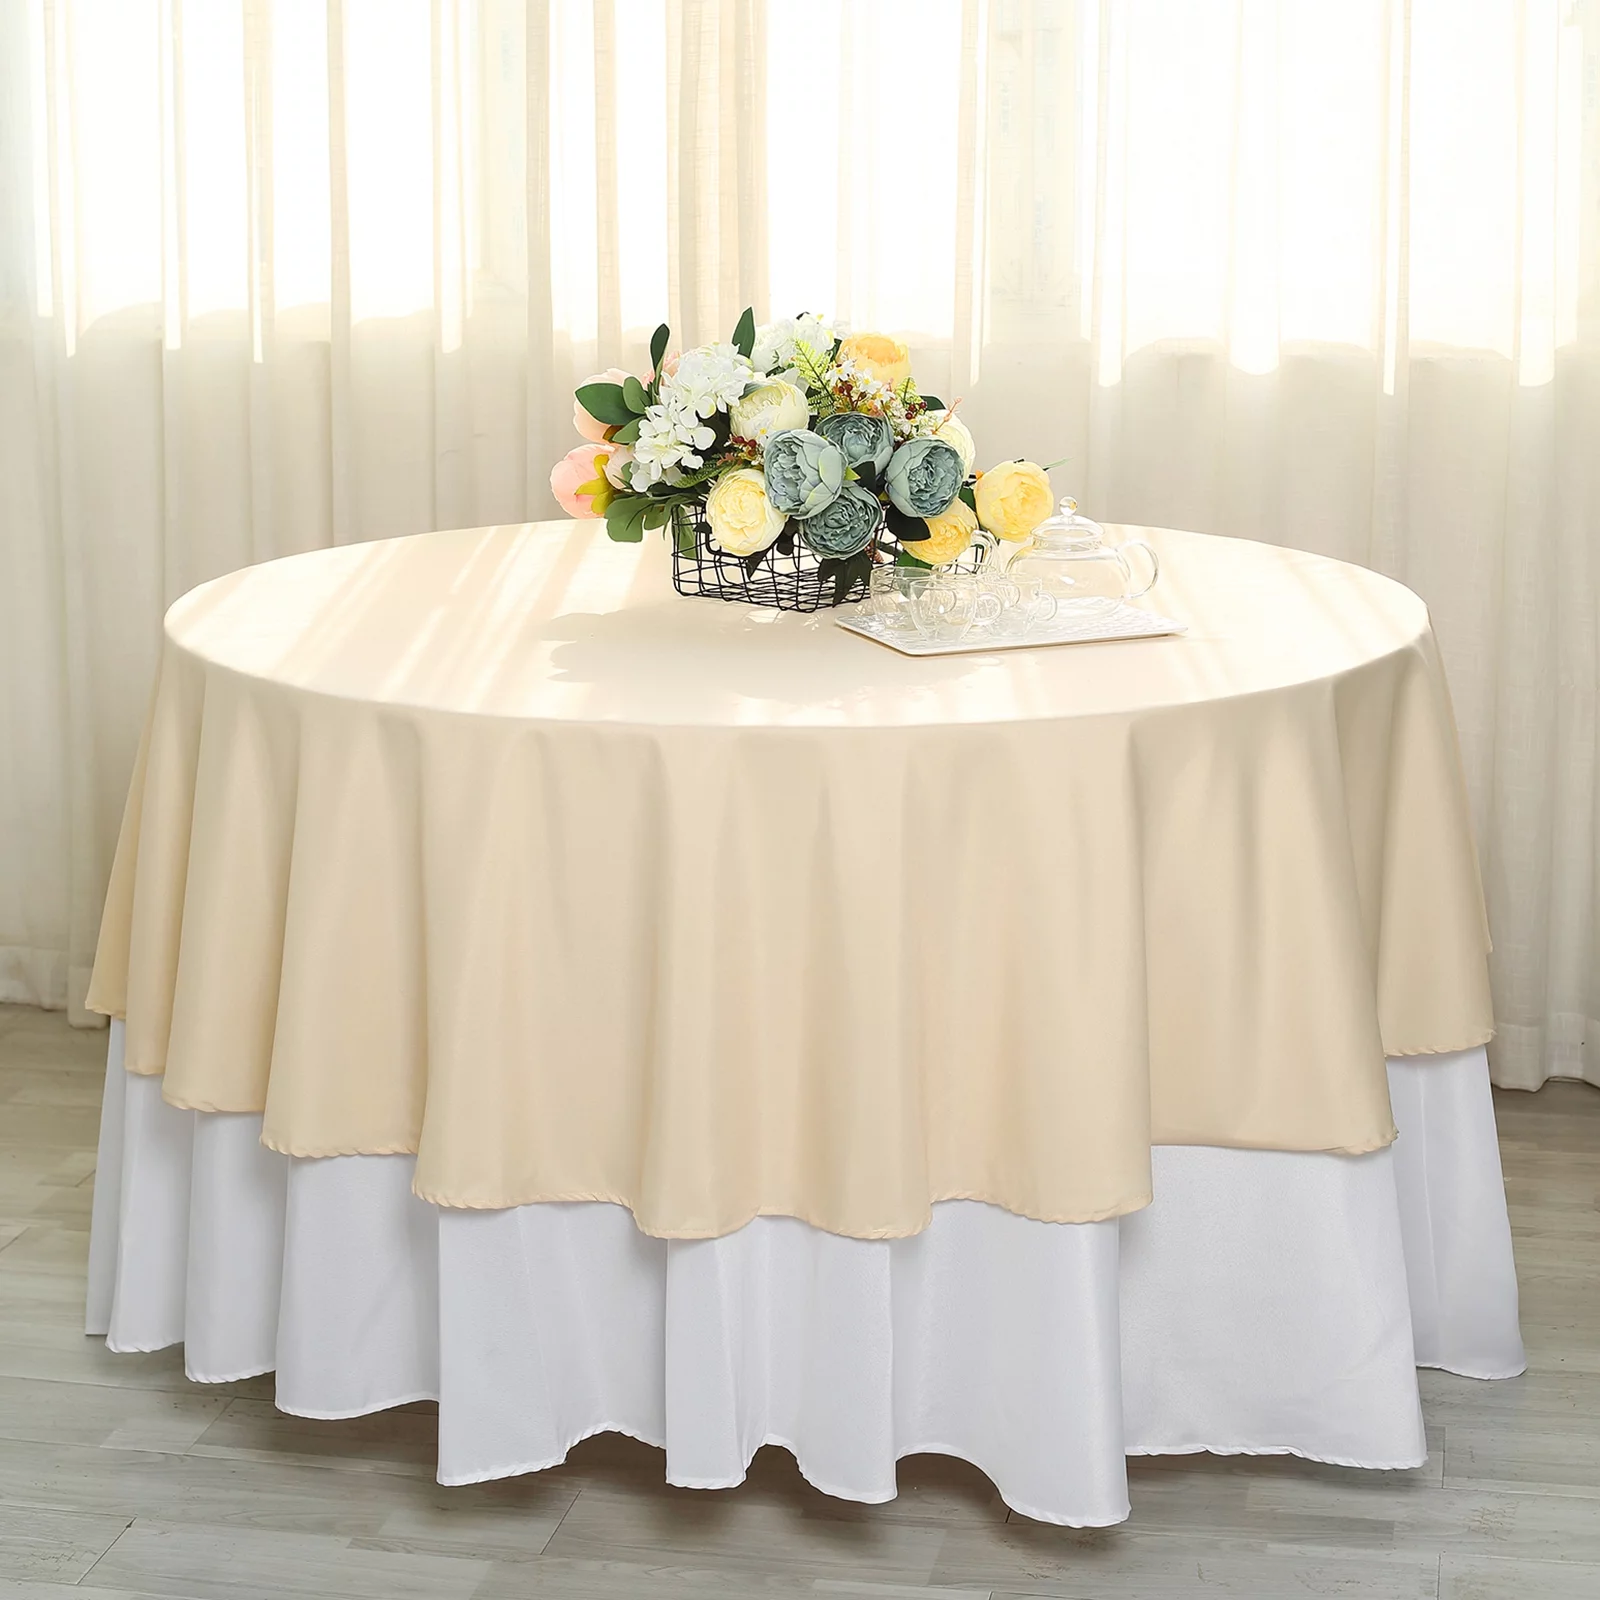 How To Get Creases Out Of Polyester Tablecloths